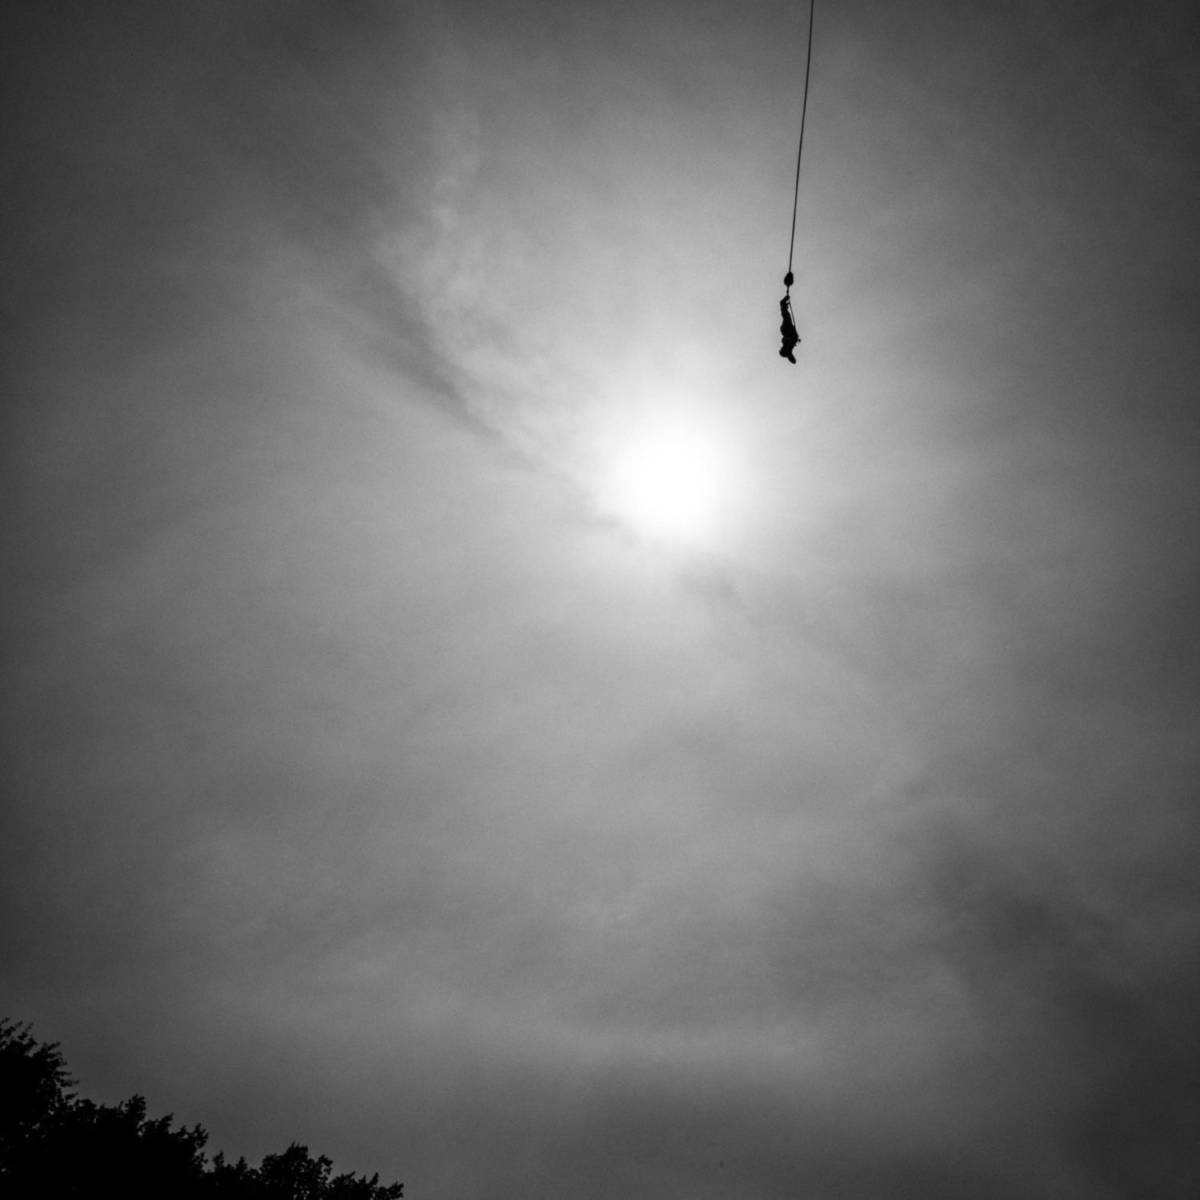 Background in Photography - Bungee Jump